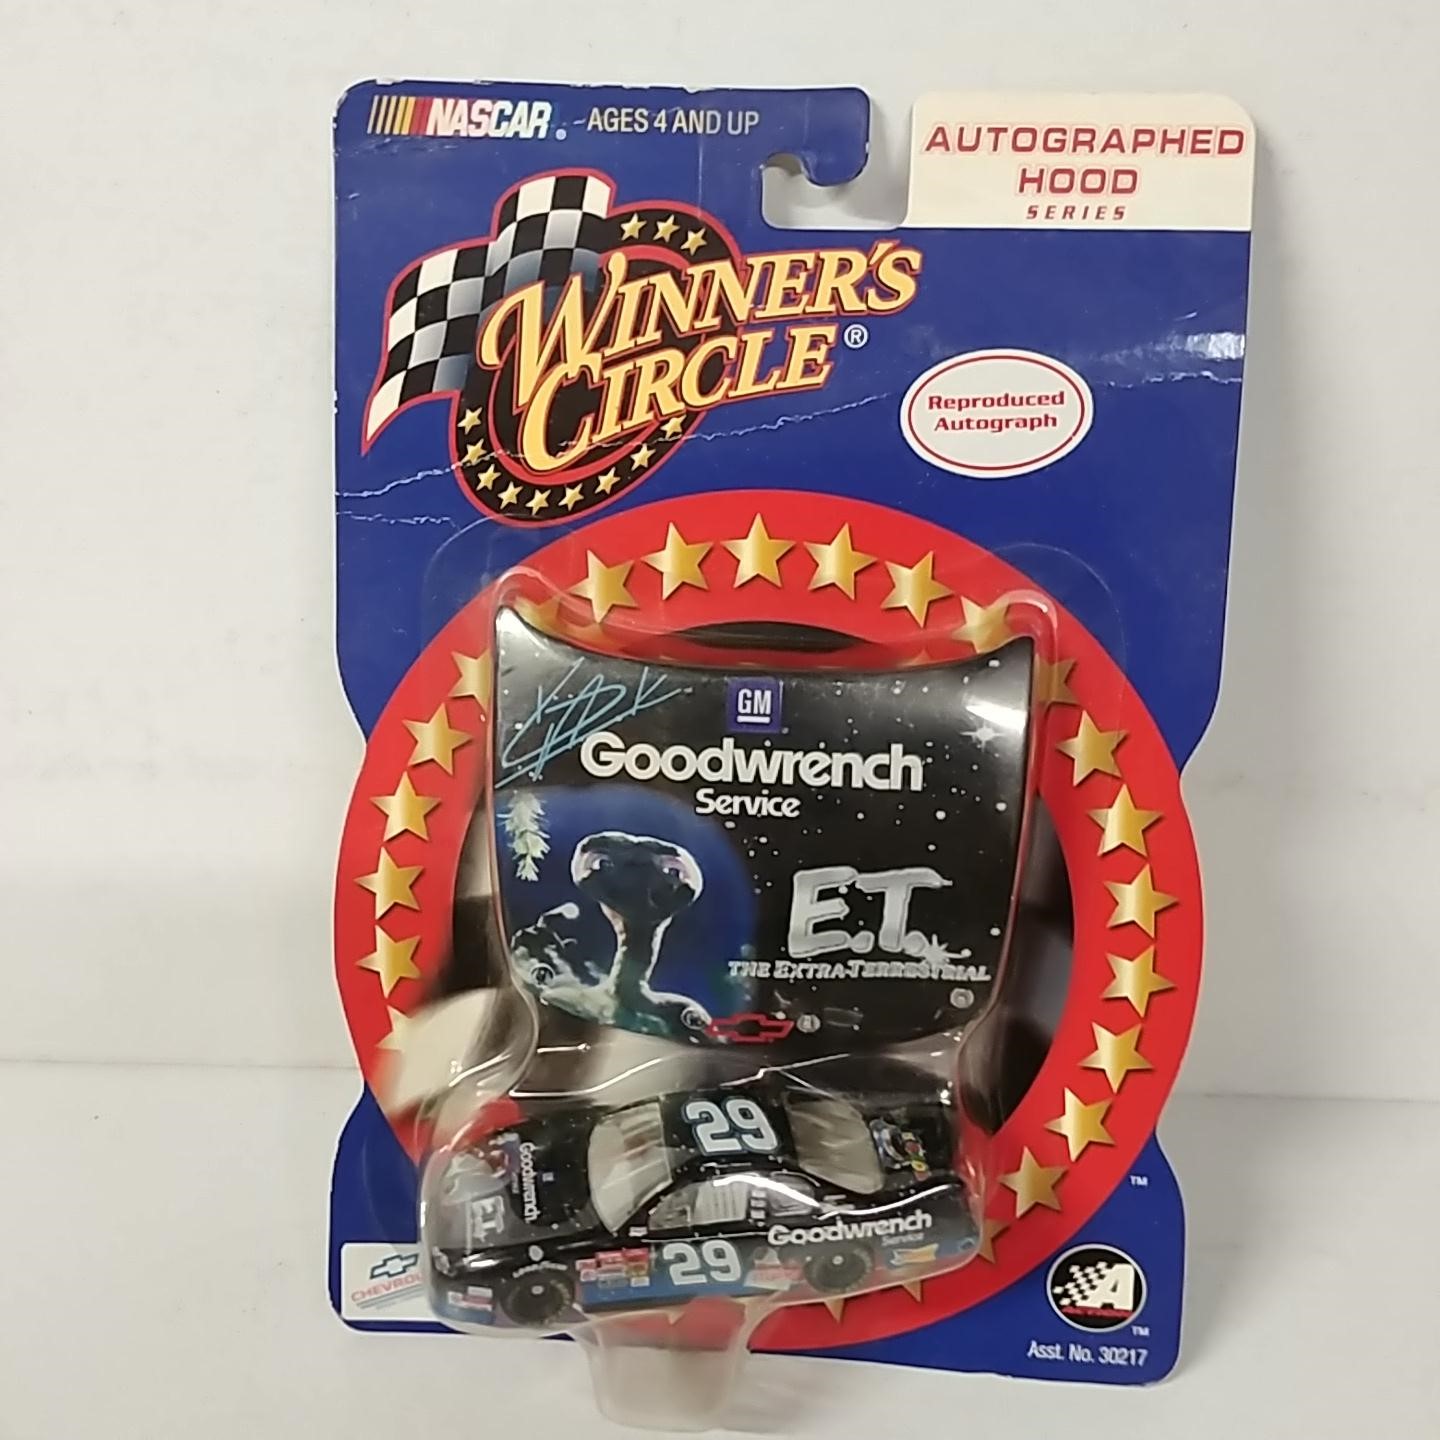 2002 Kevin Harvick 1/64th GM Goodwrench "ET" car